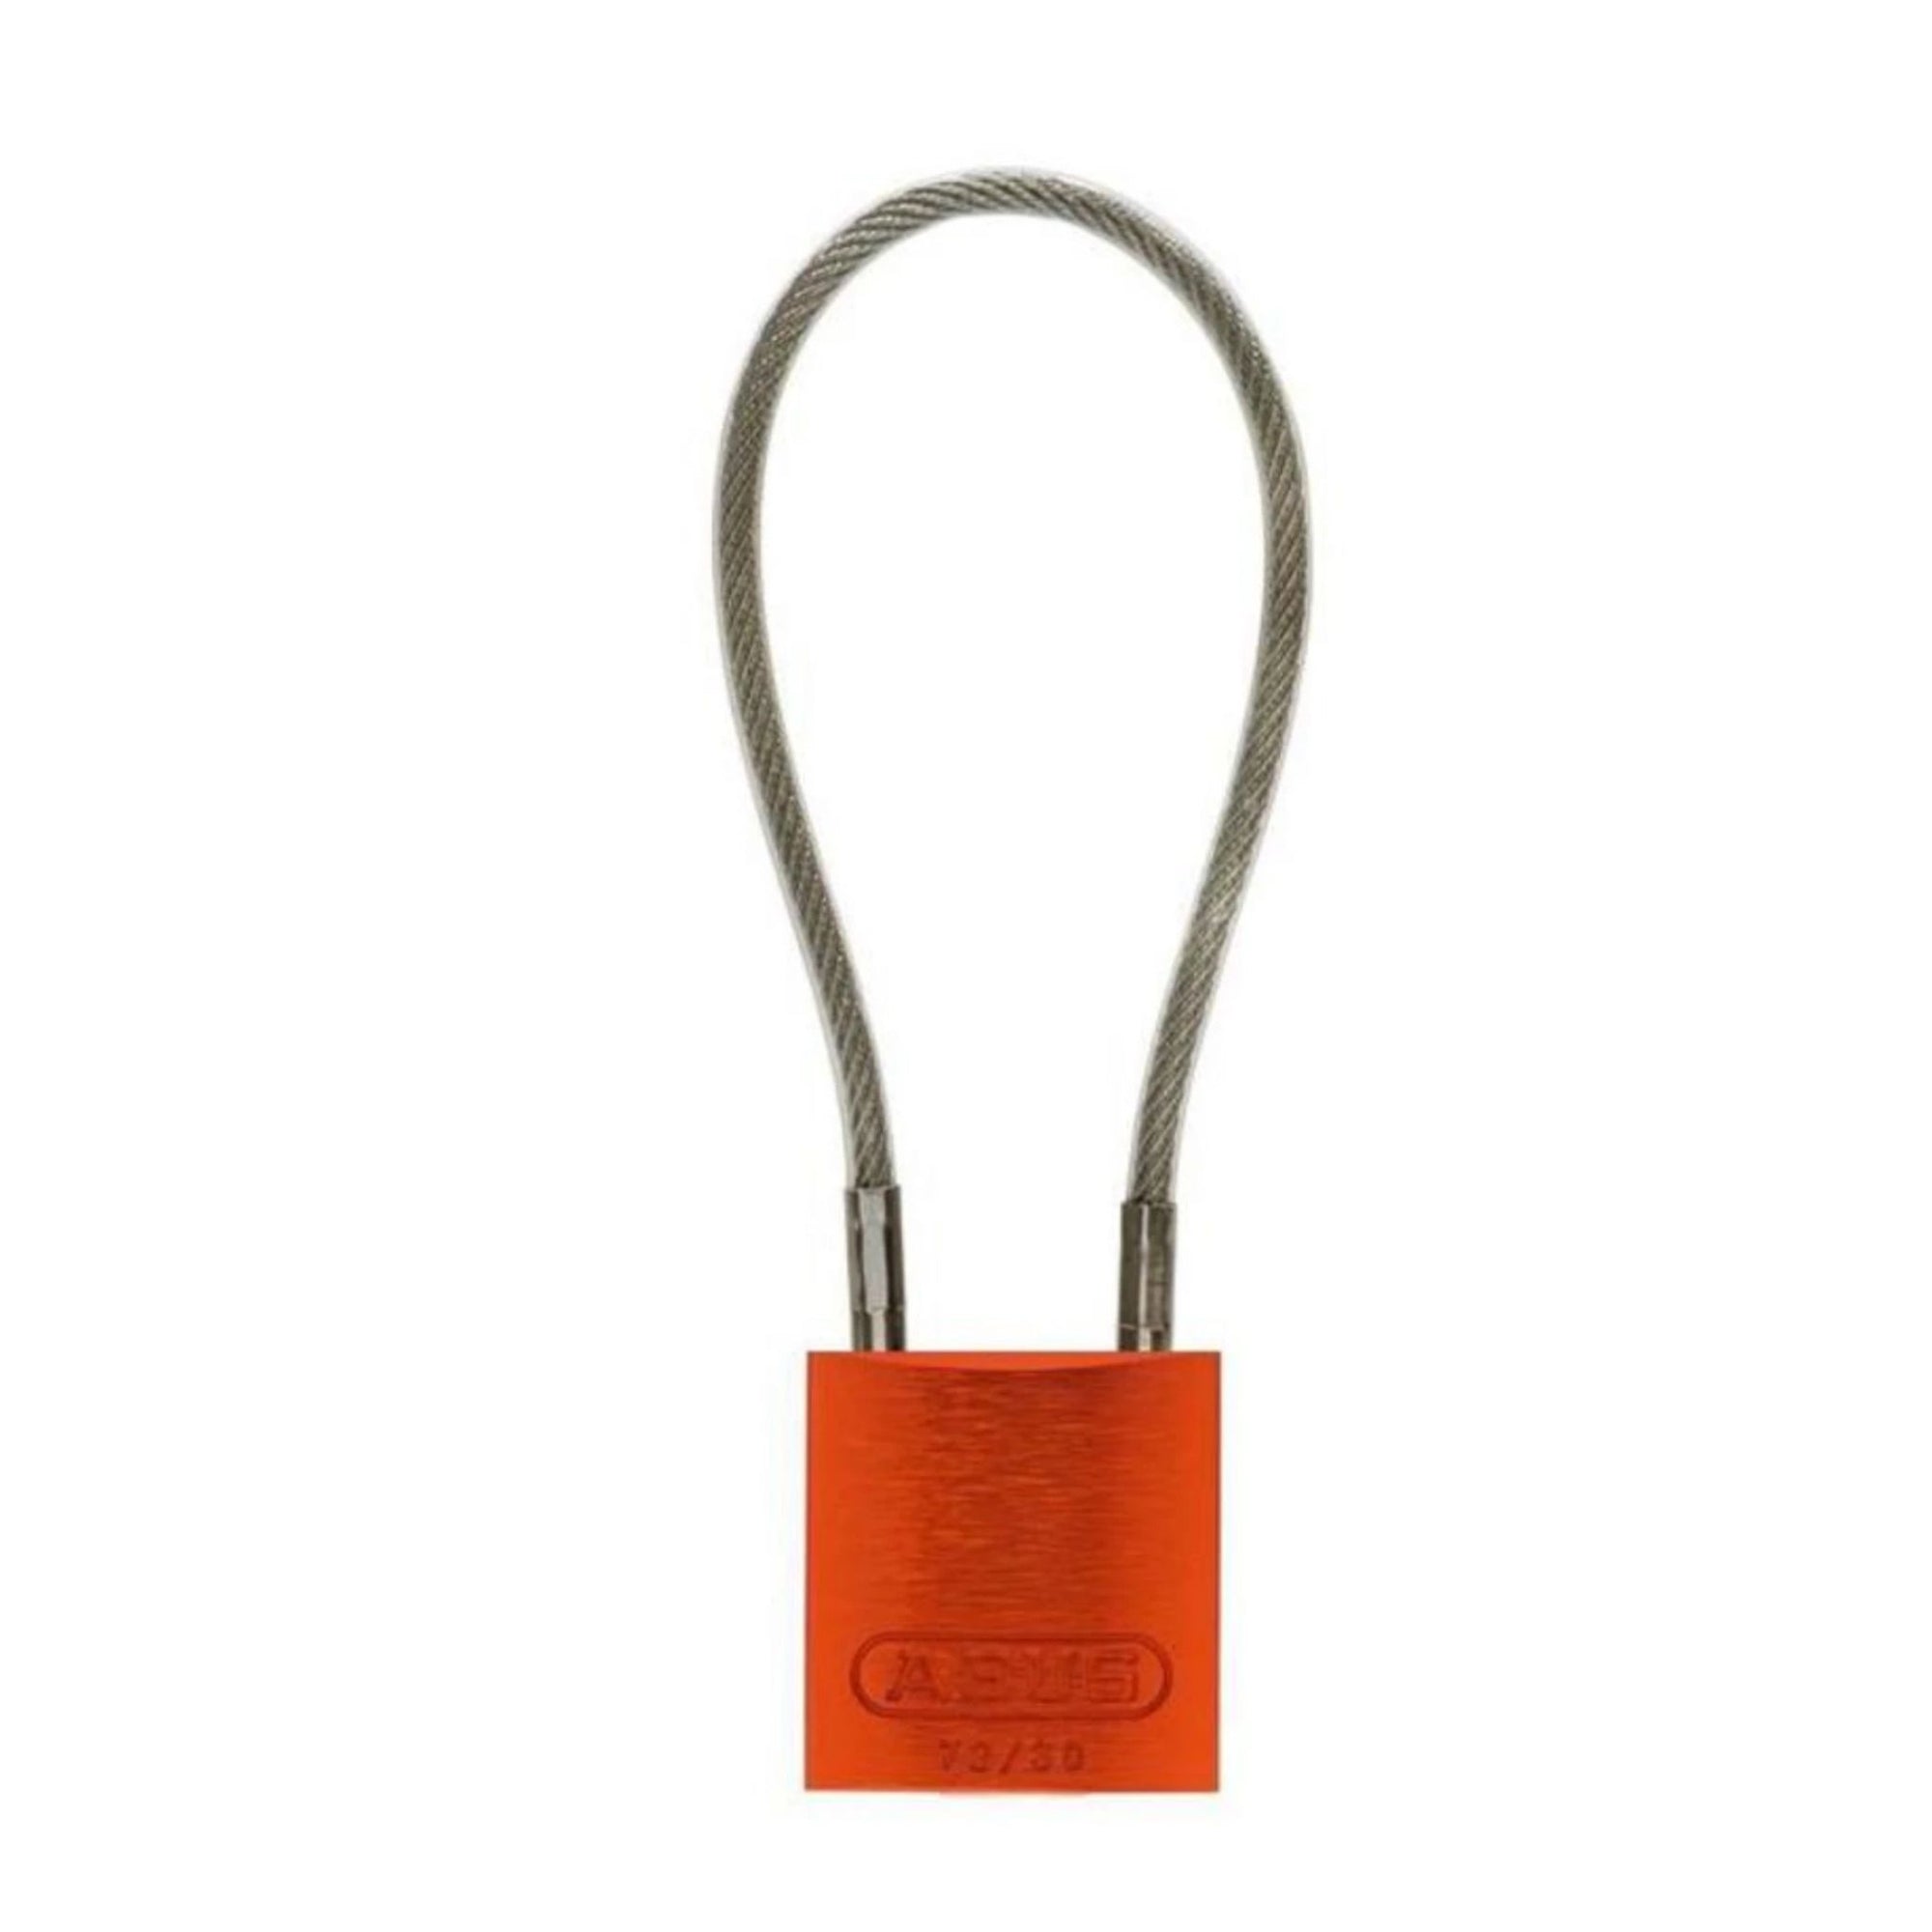 Abus 72/30CAB Aluminum Safety Locks with Cable - The Lock Source